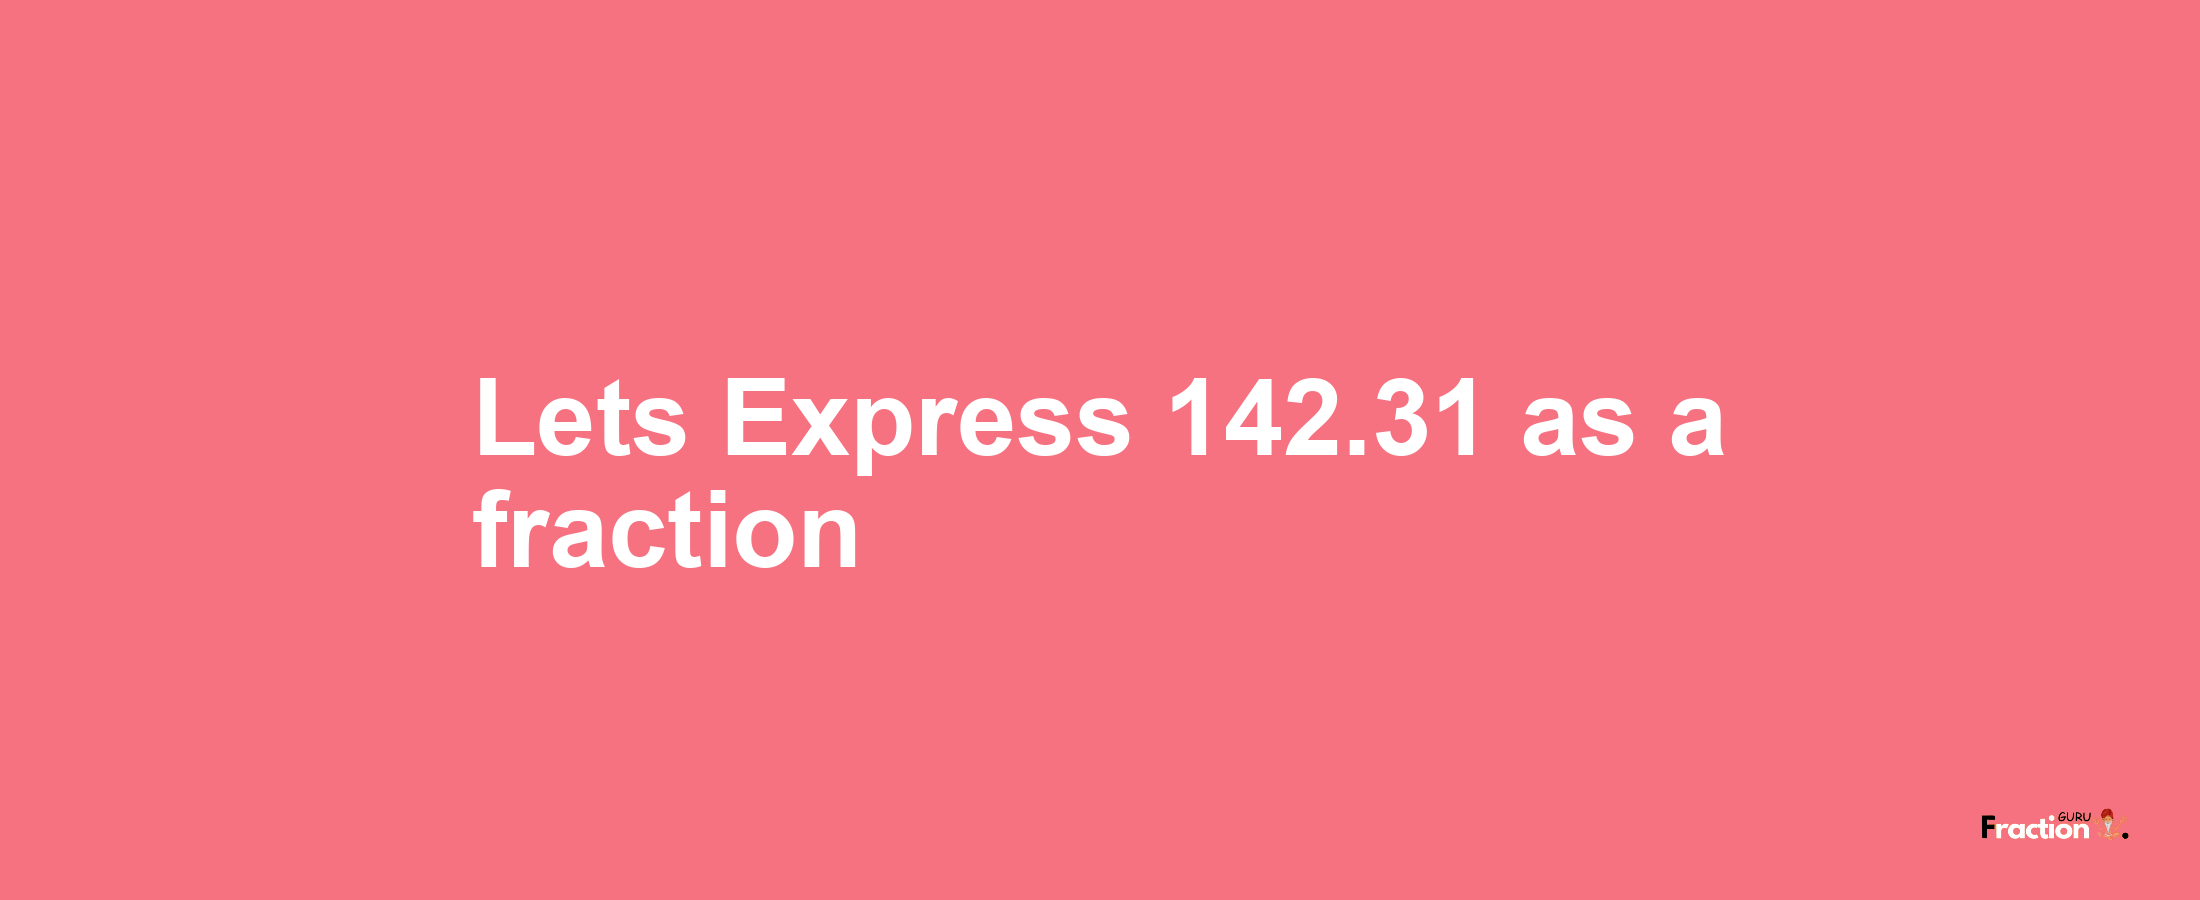 Lets Express 142.31 as afraction